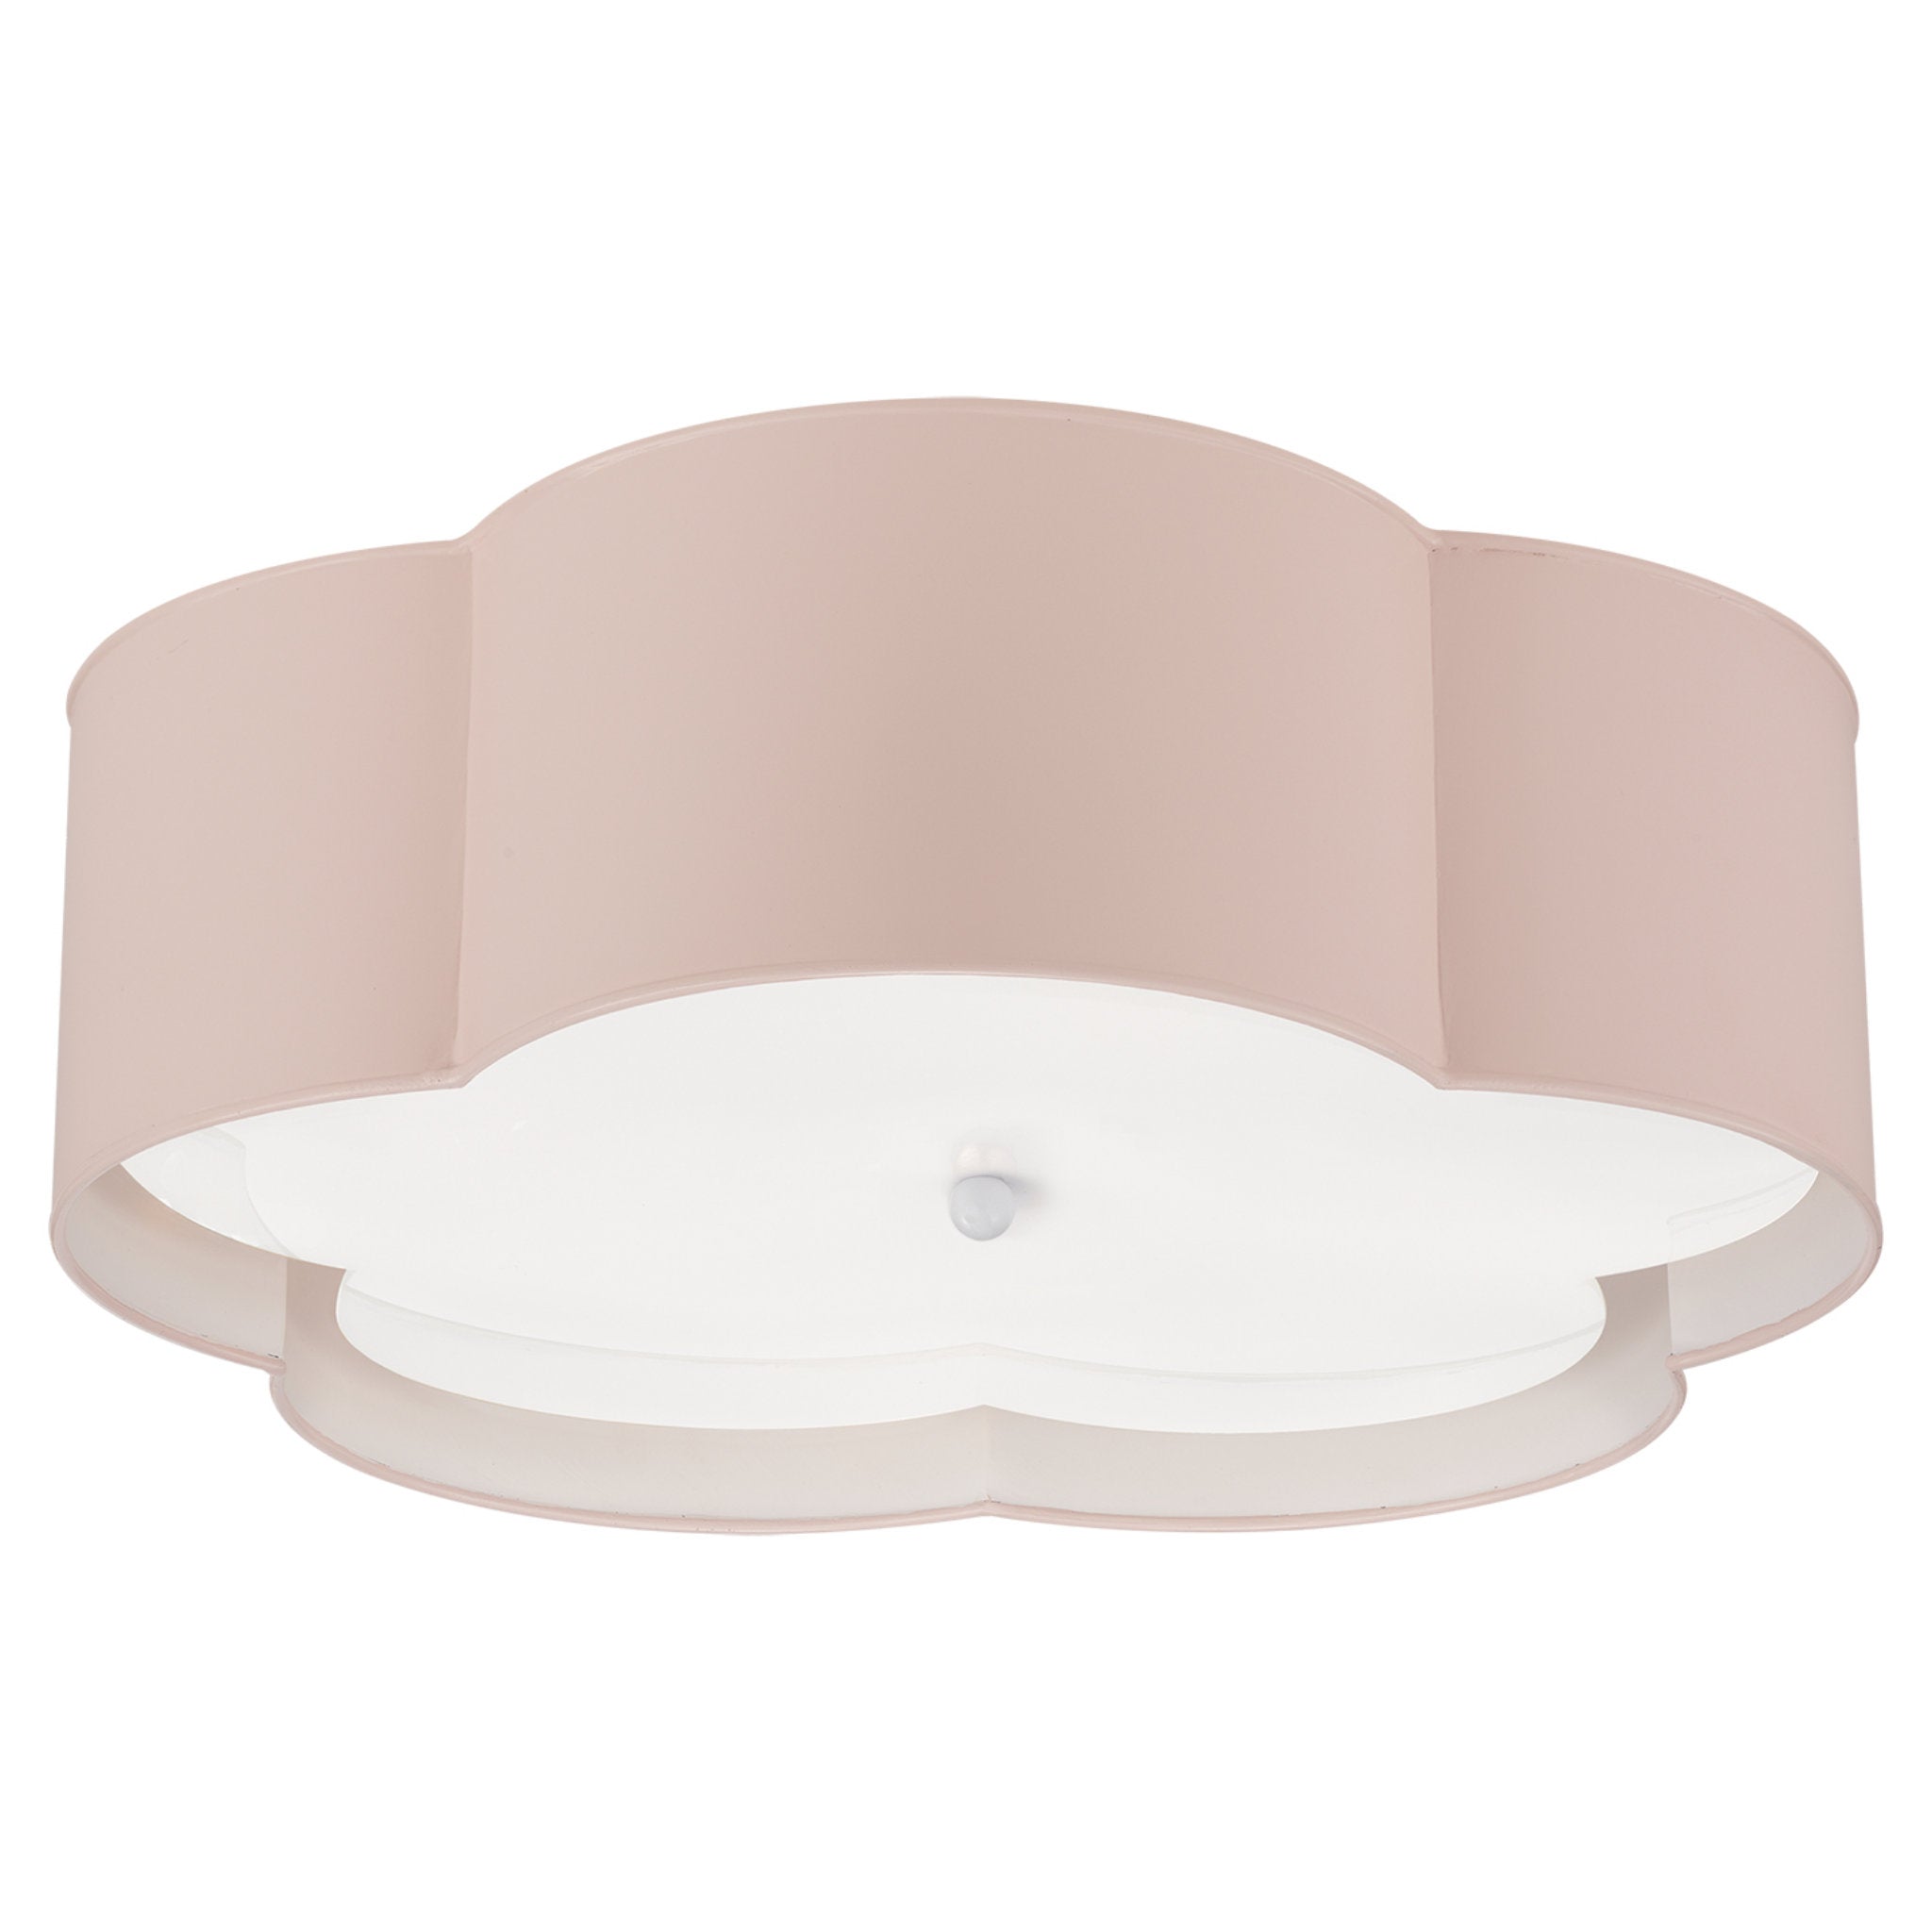 kate spade new york Bryce Large Flower Flush Mount in Pink and White w